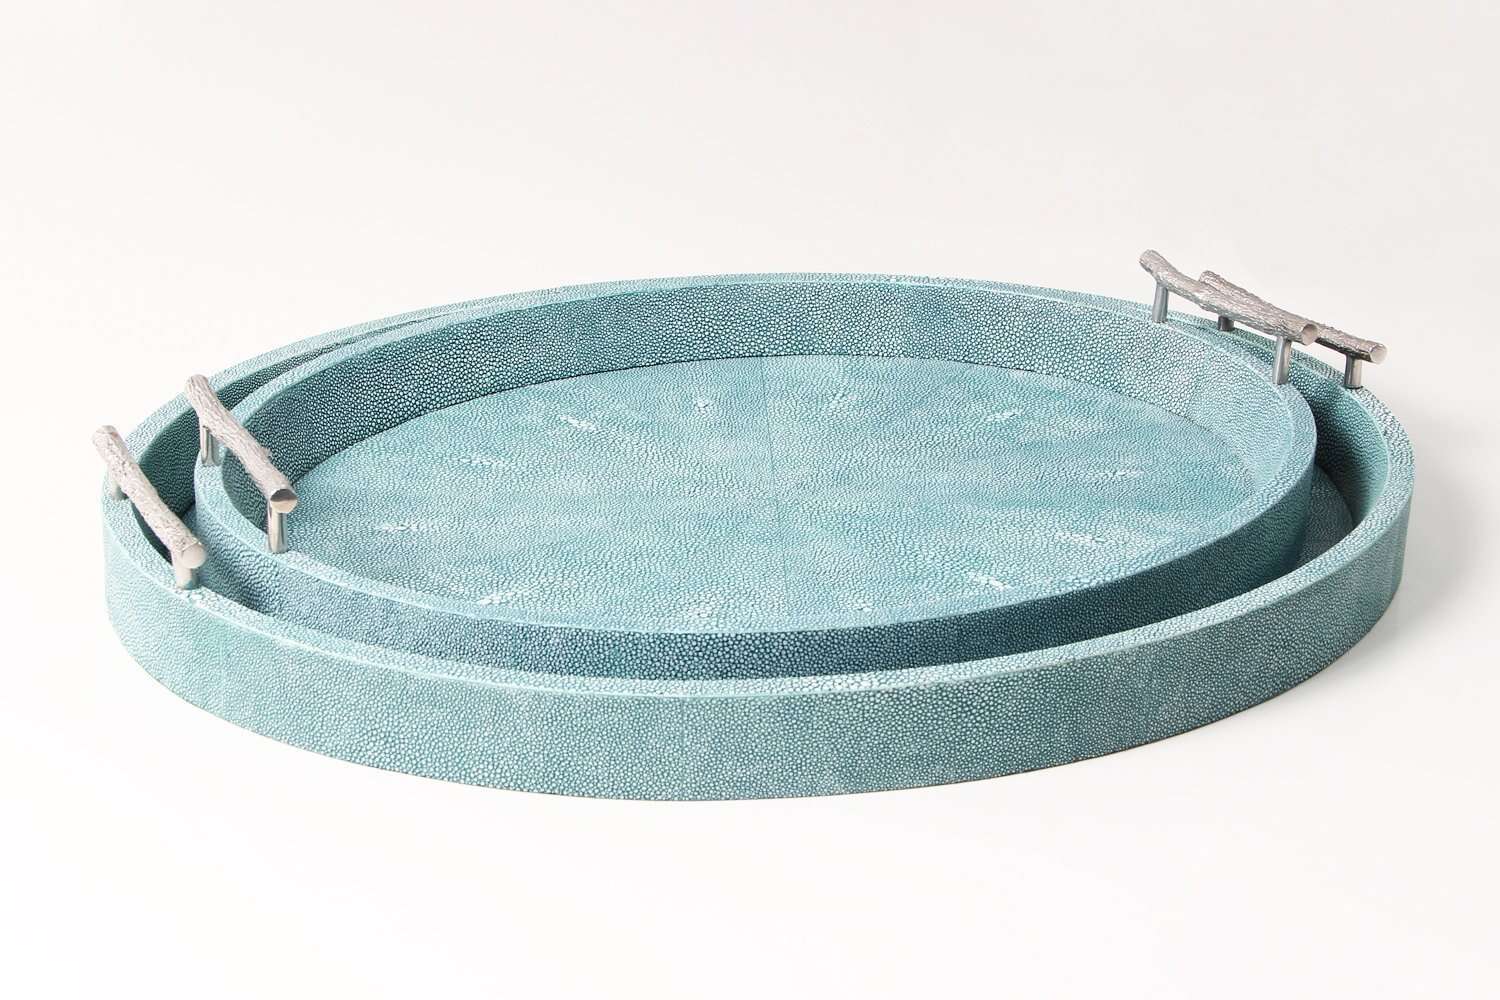 Drinks tray unique Forwood Design teal shagreen drinks tray